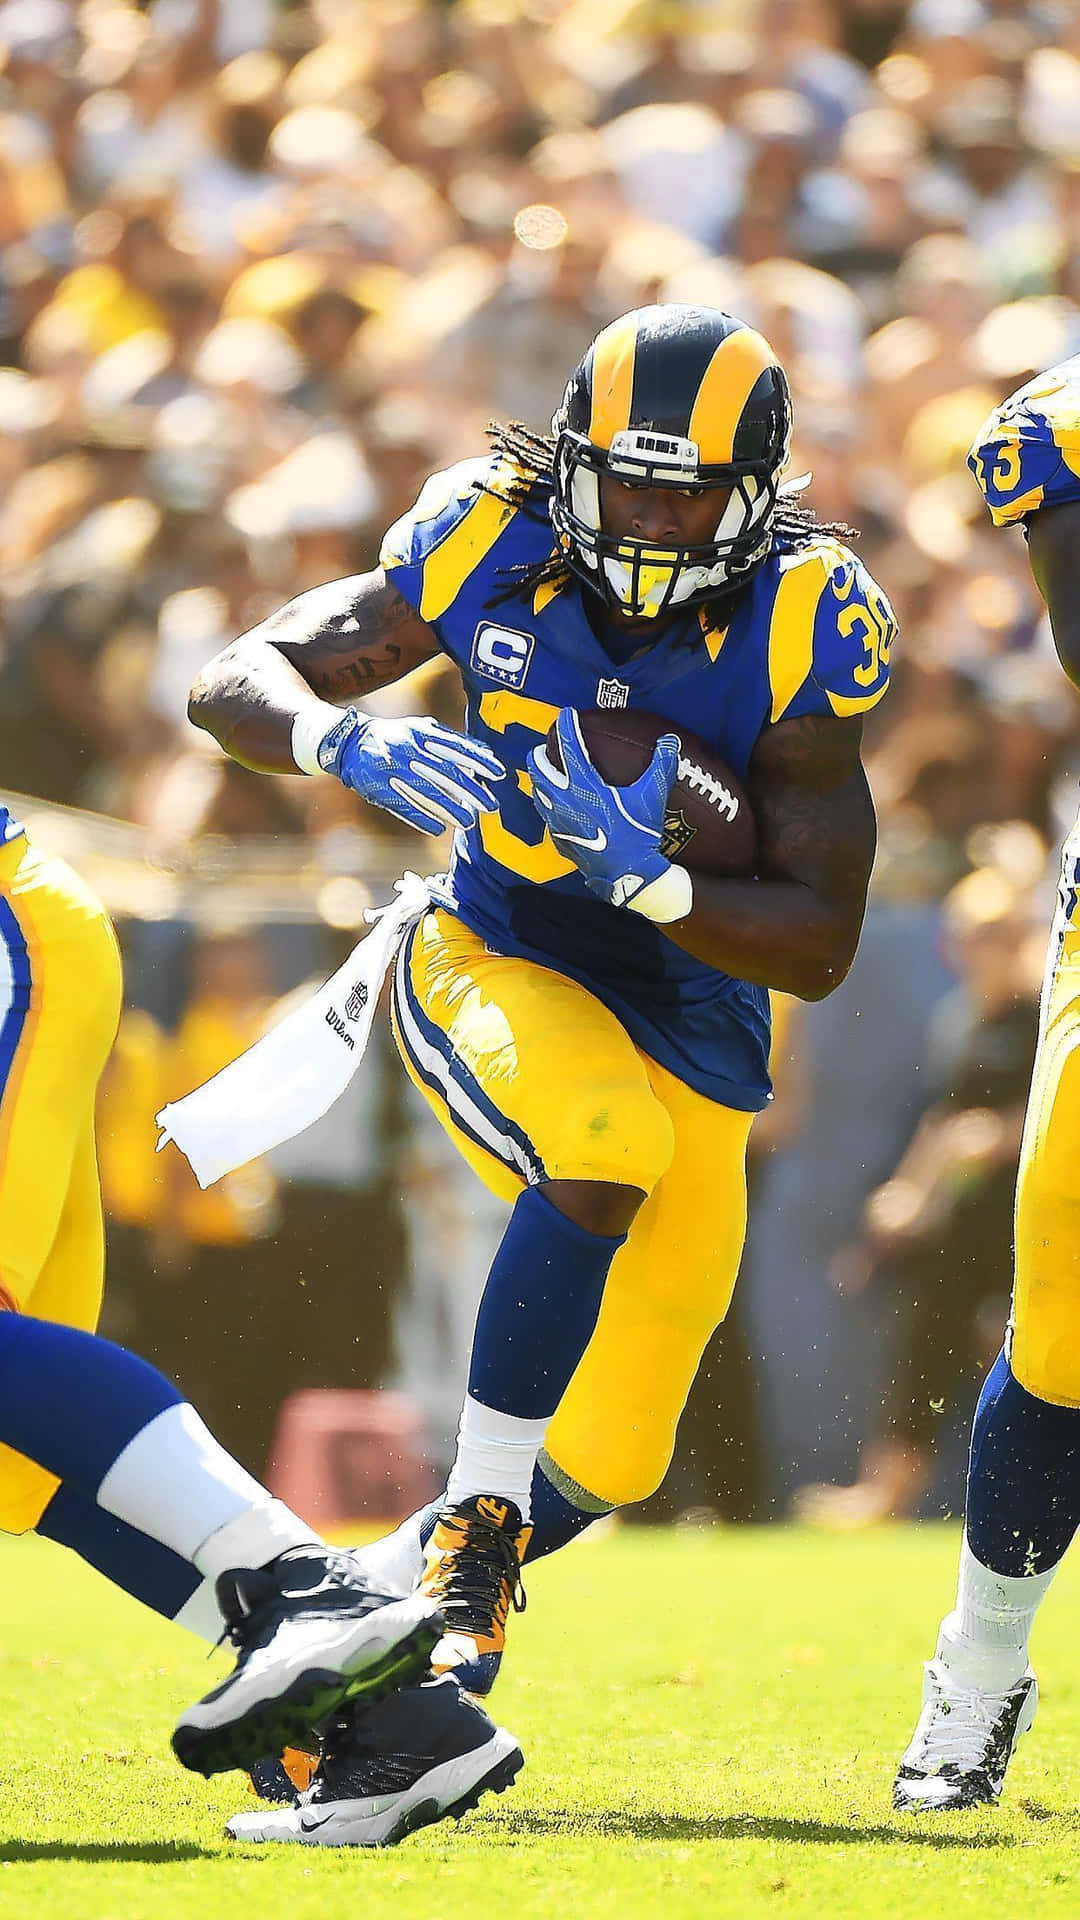 Own the latest Apple iPhone with a Rams twist! Wallpaper